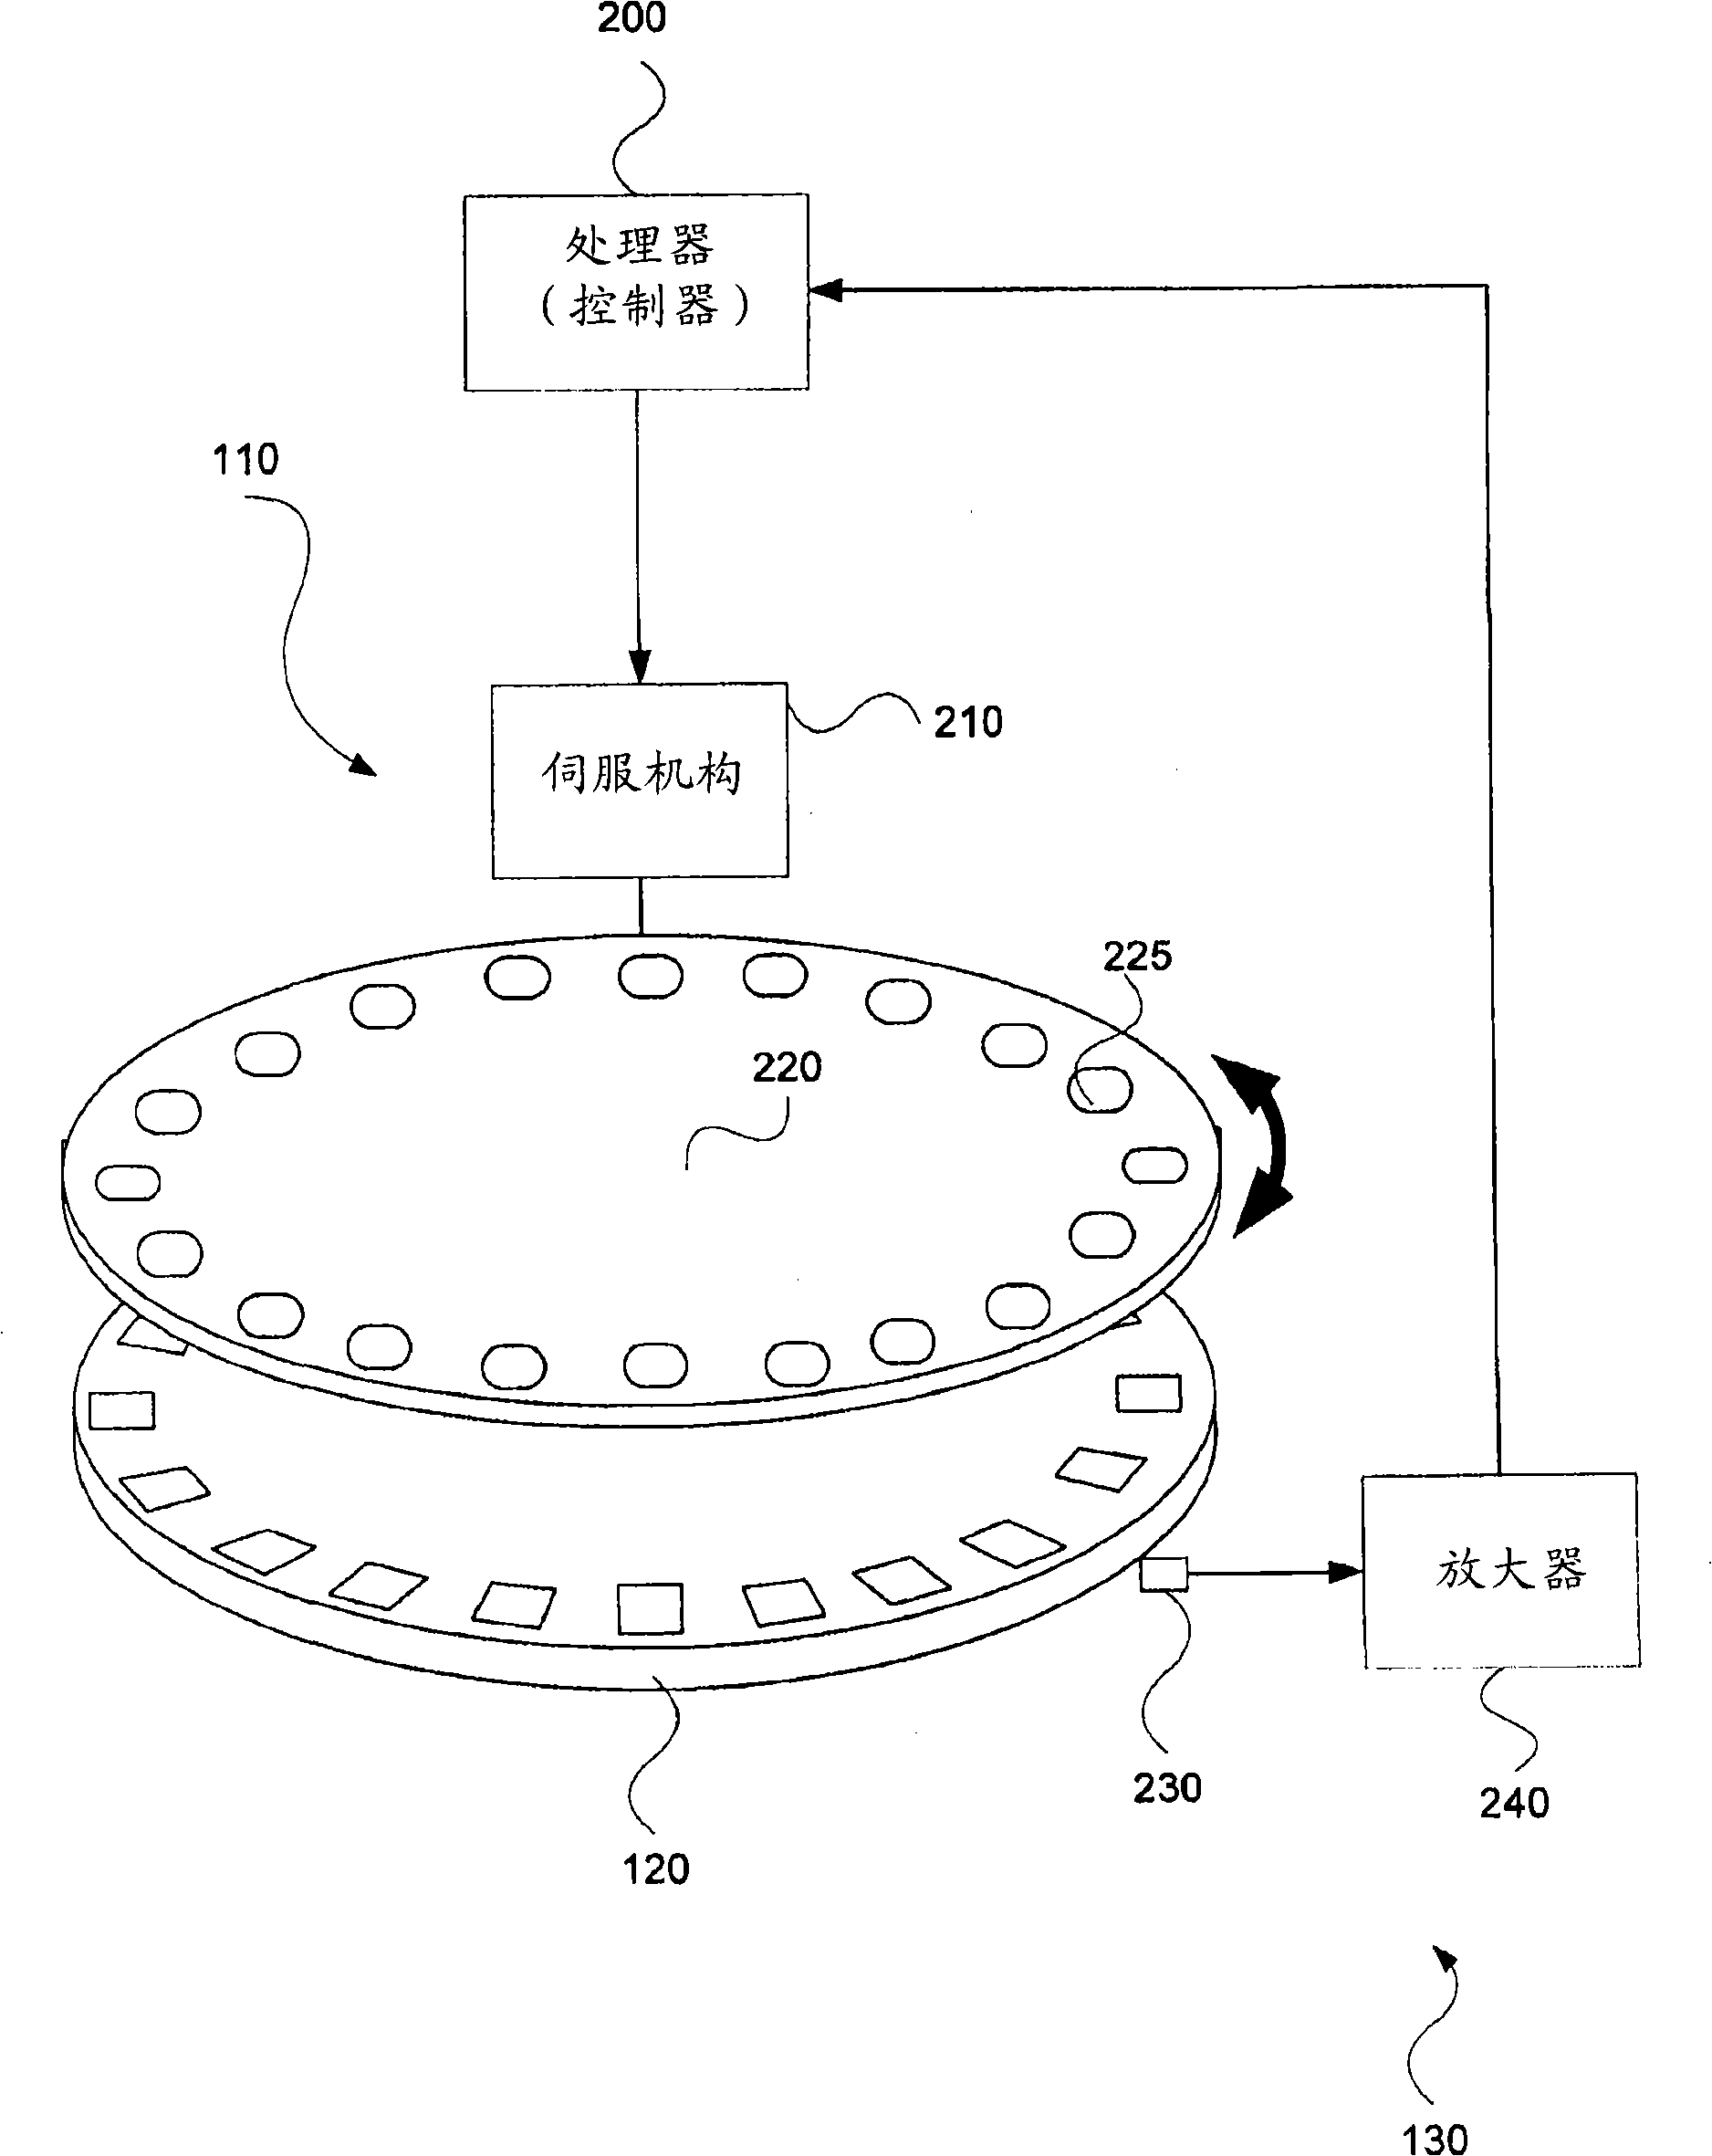 System for optically analyzing a substance